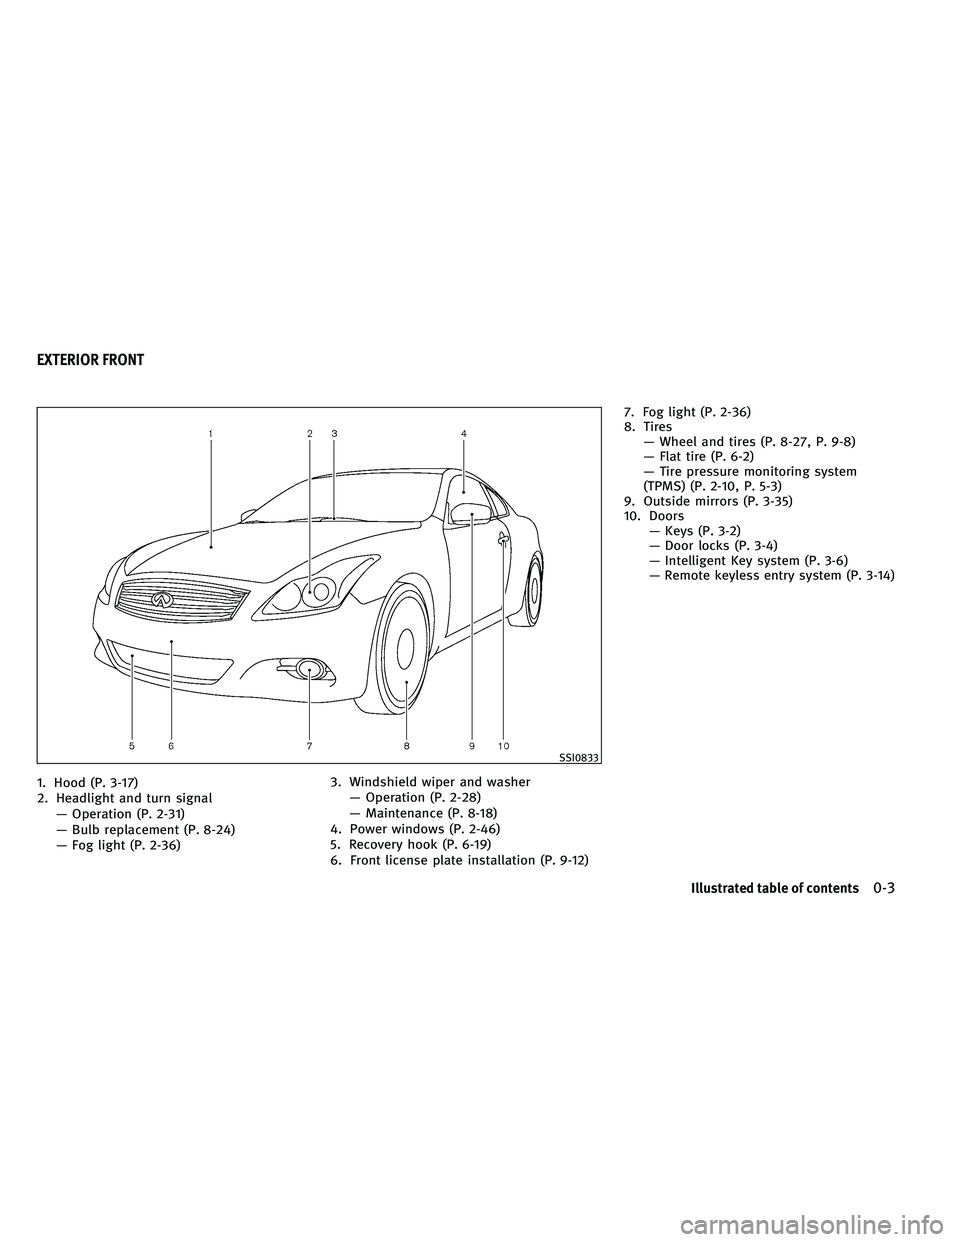 INFINITI G-CONVERTIBLE 2011  Owners Manual 1. Hood (P. 3-17)
2. Headlight and turn signal— Operation (P. 2-31)
— Bulb replacement (P. 8-24)
— Fog light (P. 2-36) 3. Windshield wiper and washer
— Operation (P. 2-28)
— Maintenance (P. 